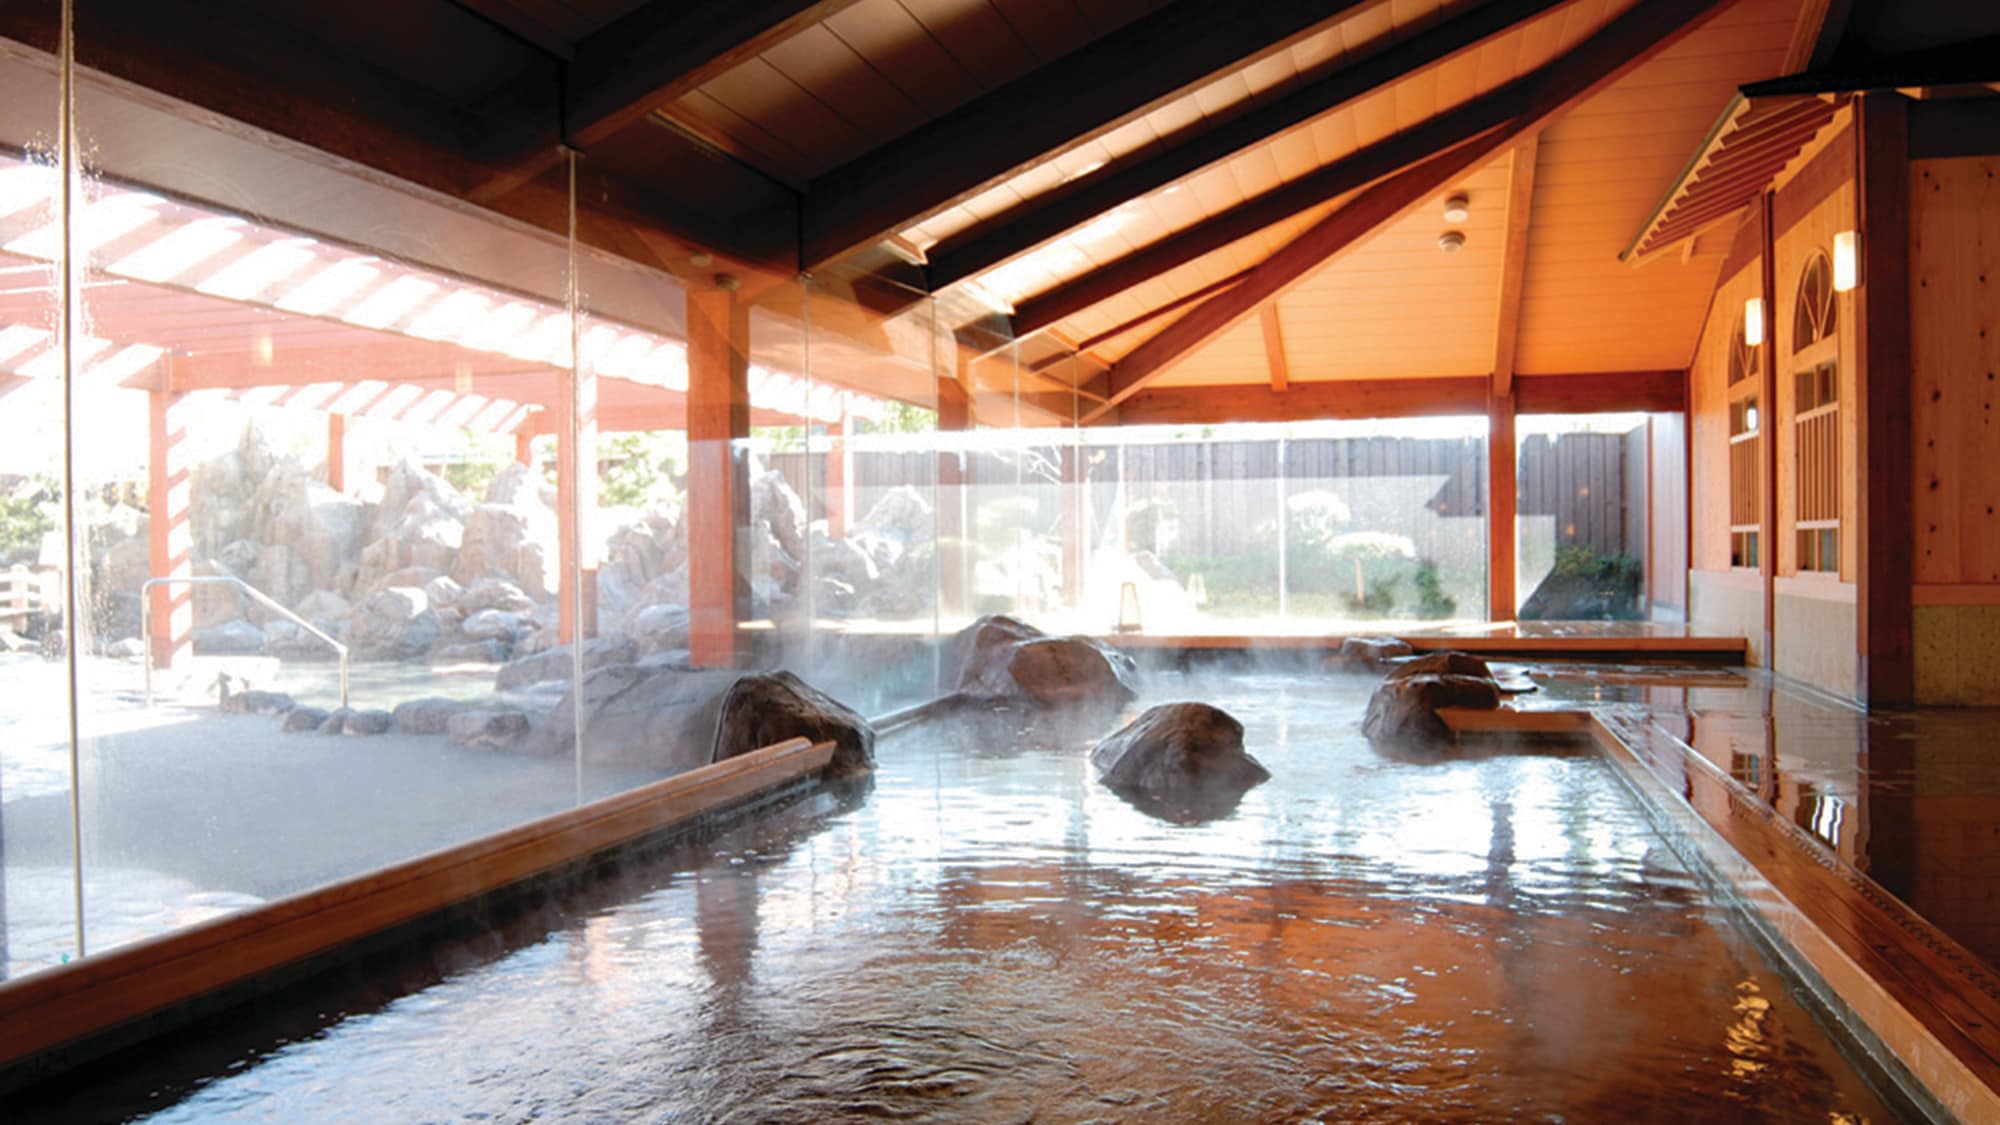 Kaika Onsen: You can enjoy the hot springs that spring up from 1400m underground.